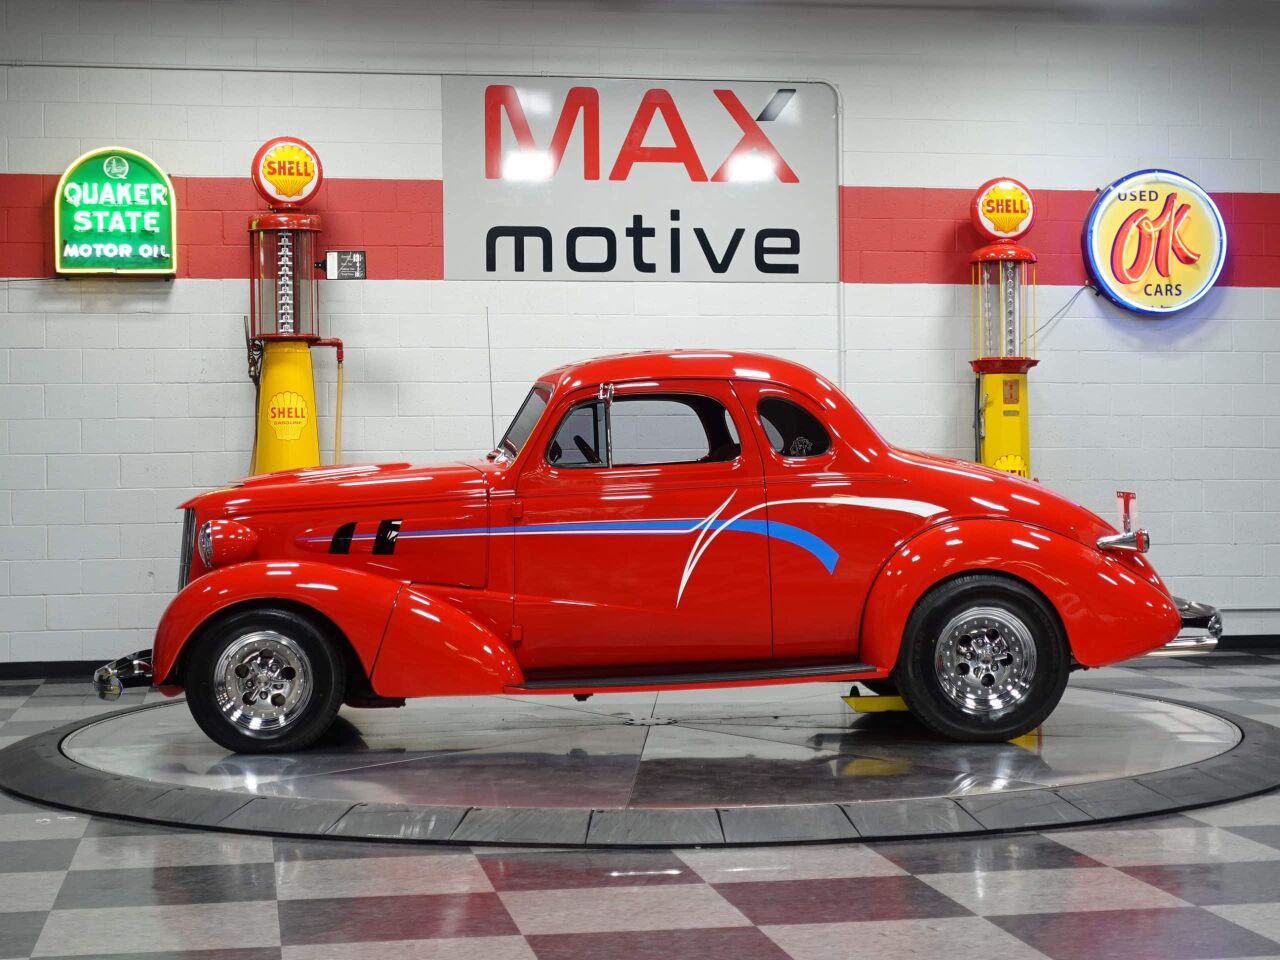 1938 Chevrolet Coupe 6